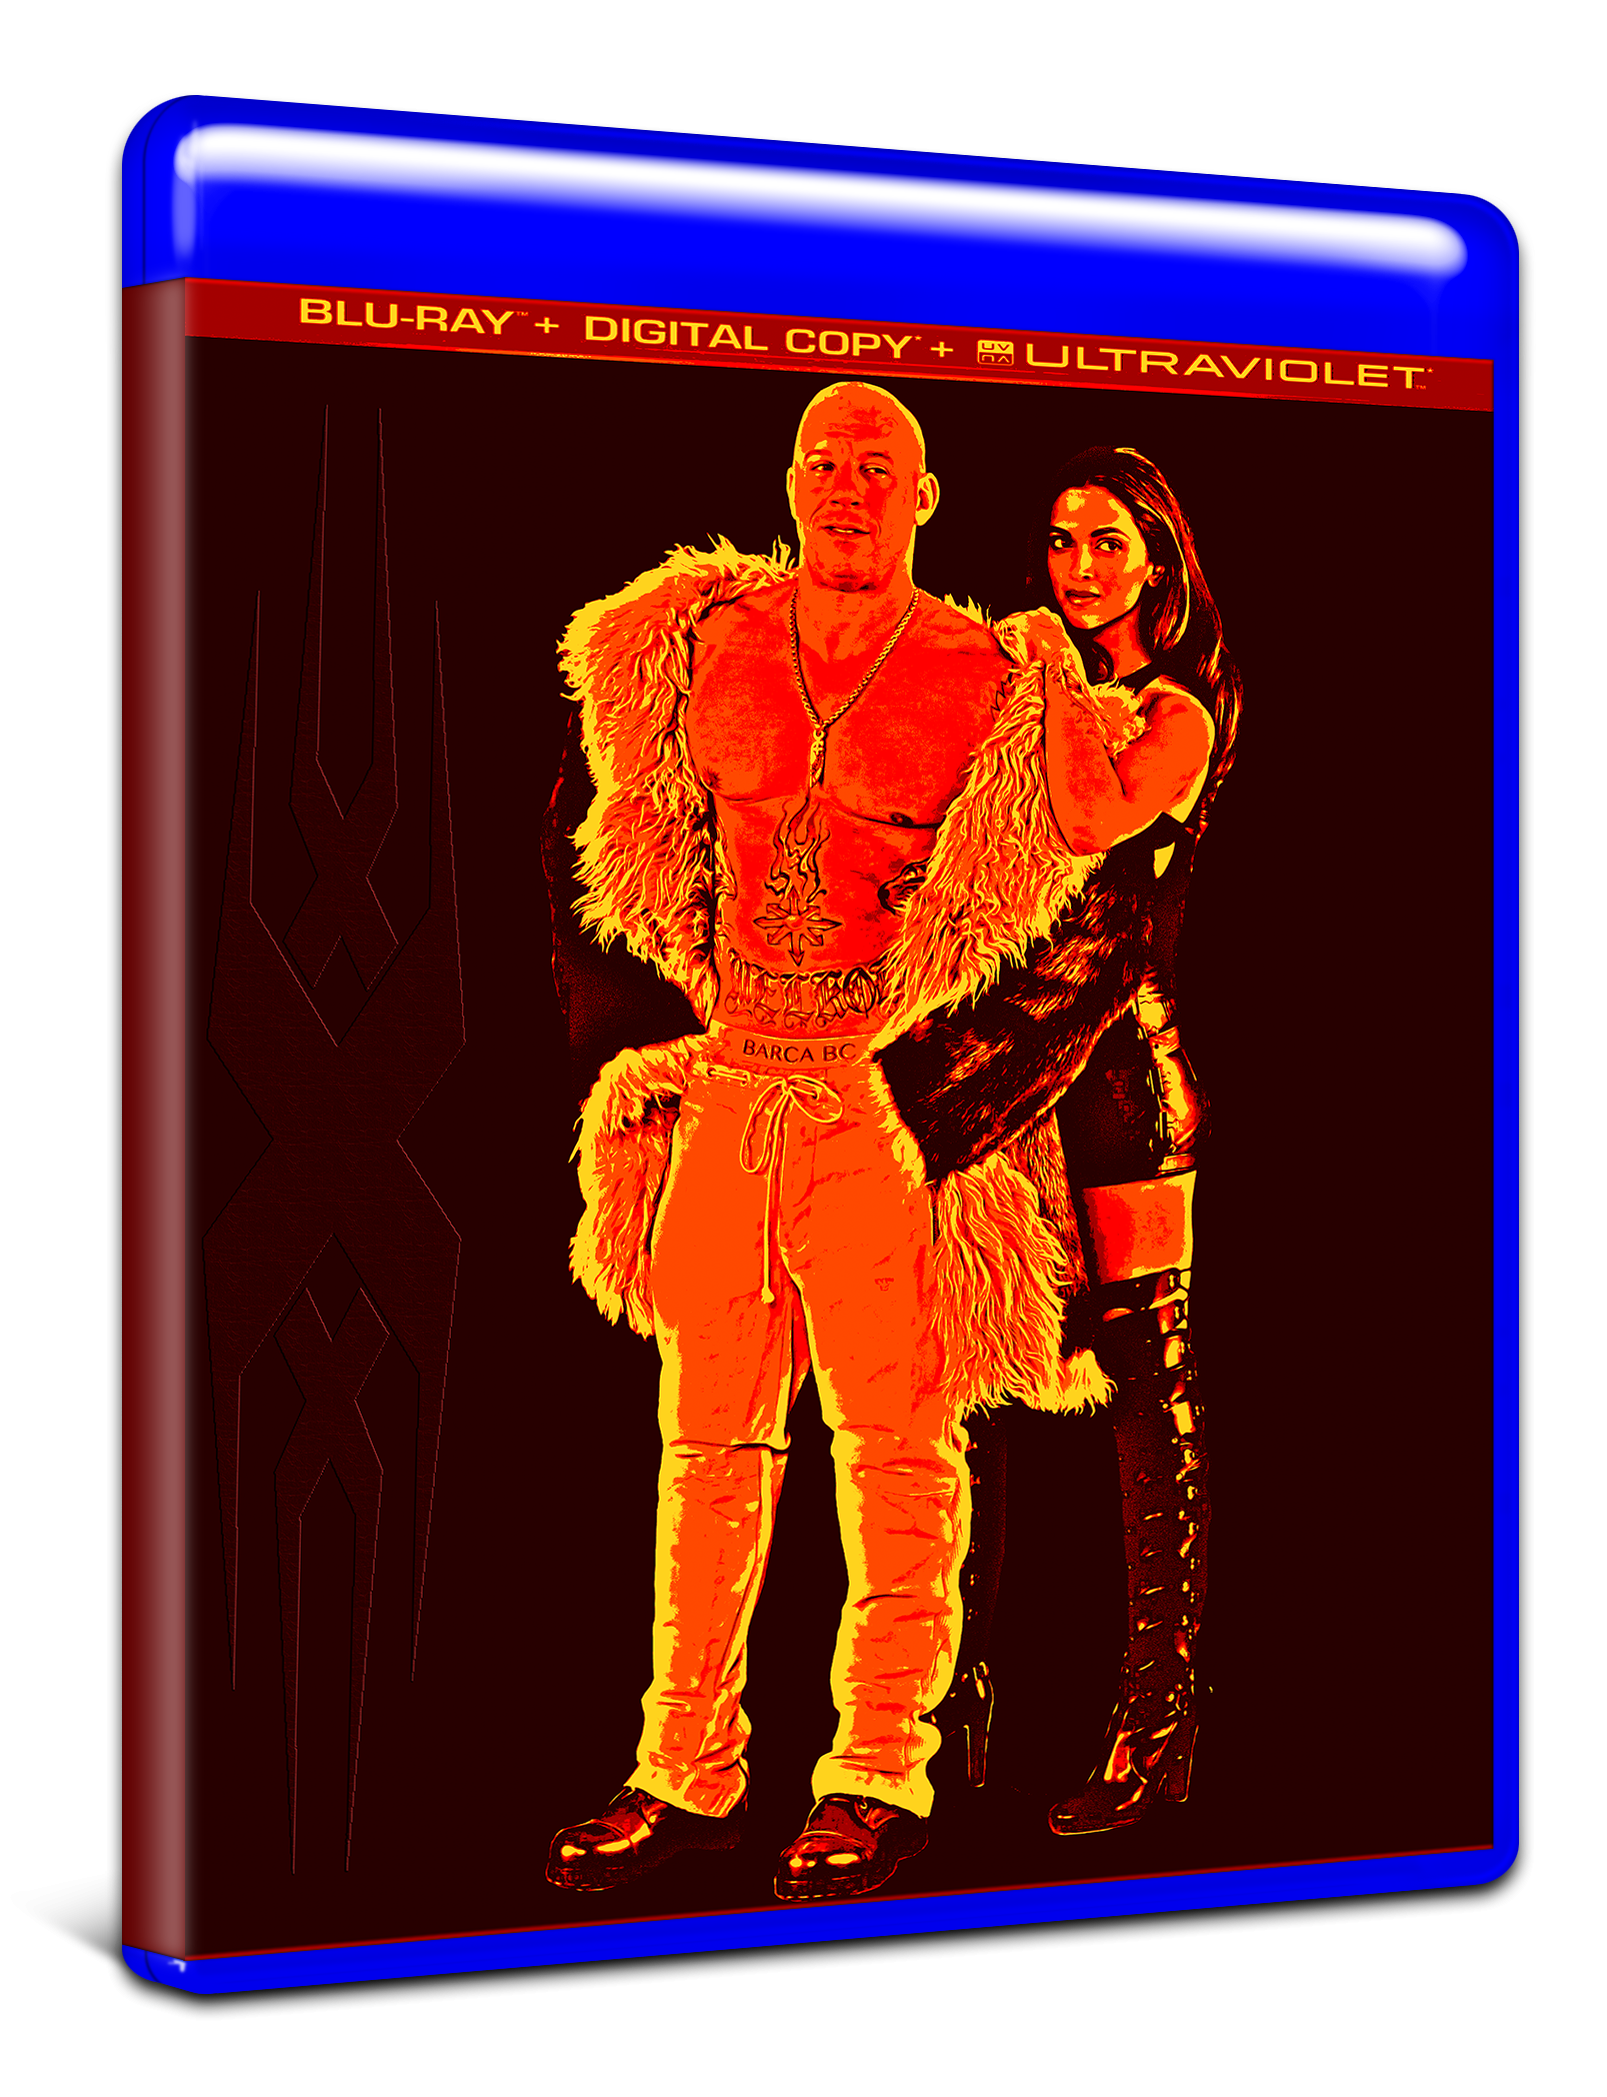 xXx: Return of Xander Cage box cover